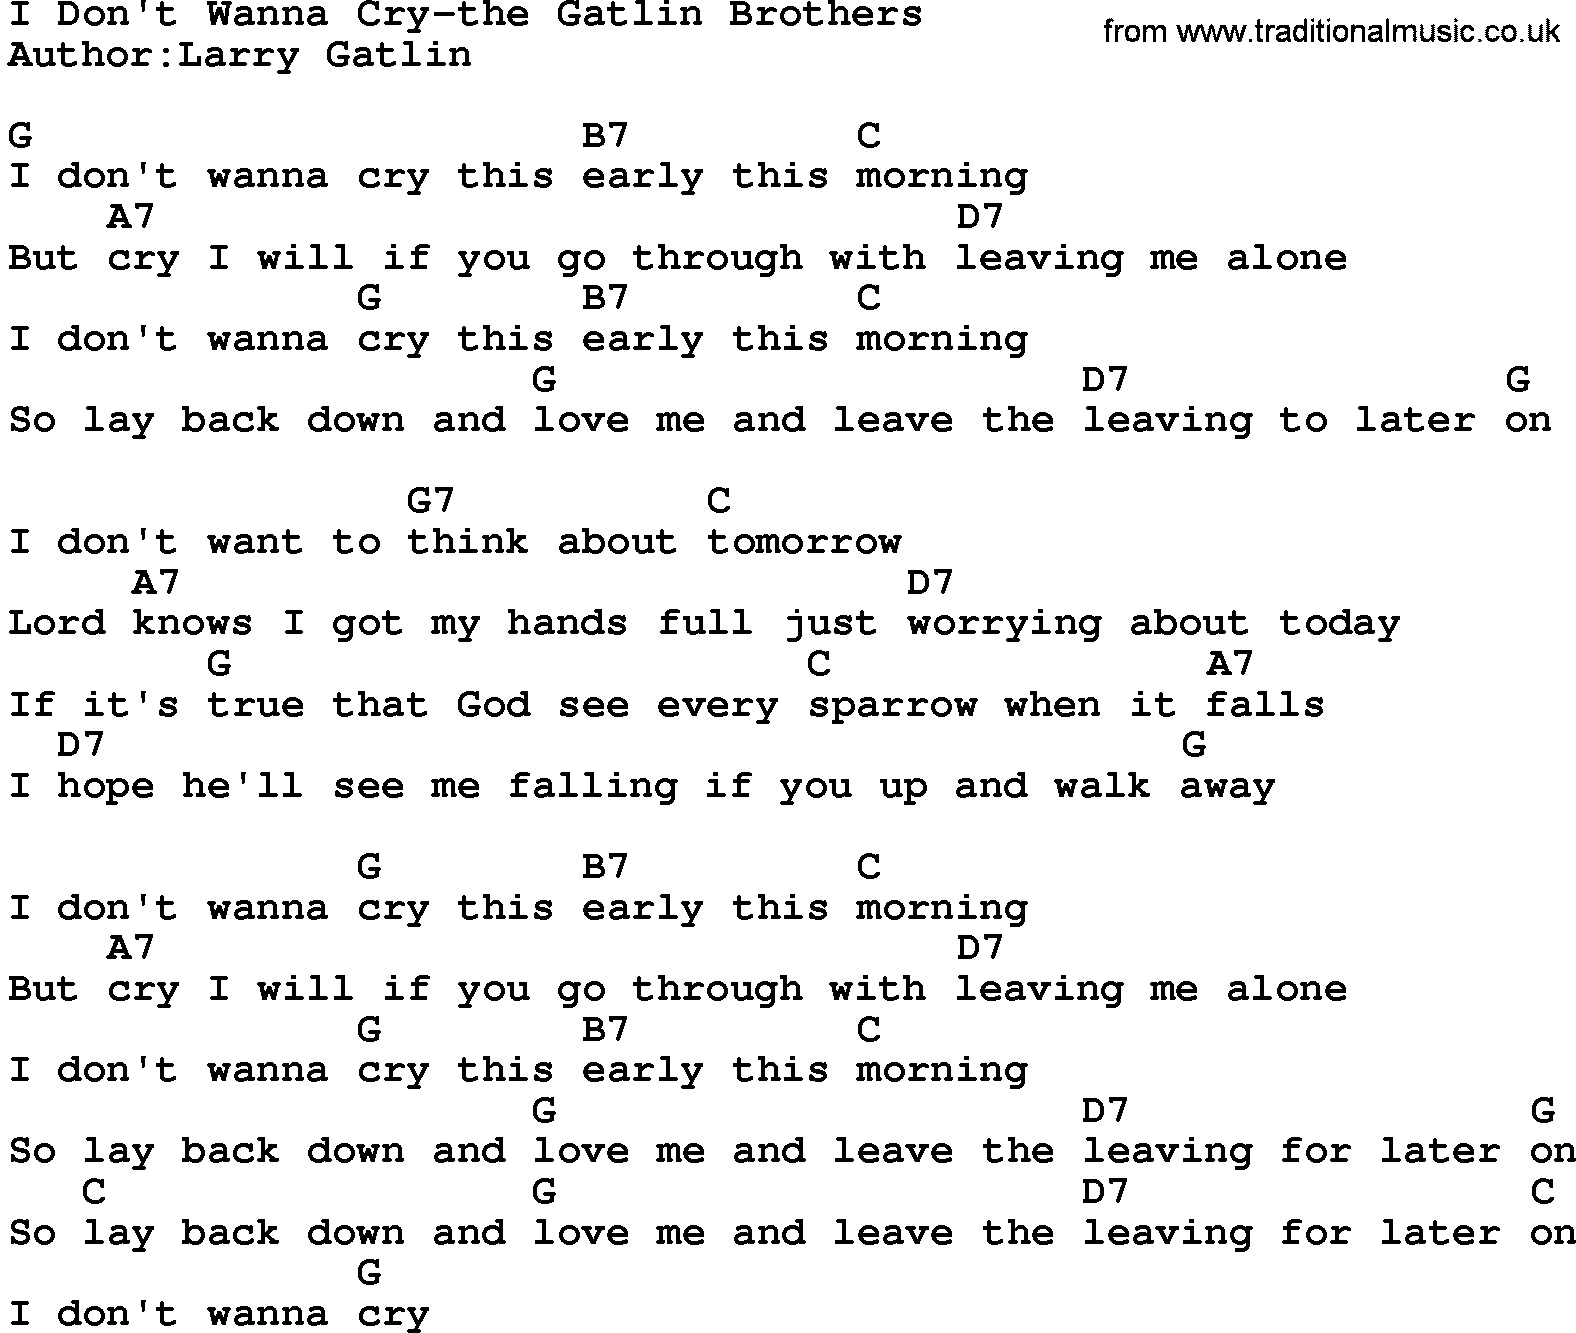 Country music song: I Don't Wanna Cry-The Gatlin Brothers lyrics and chords